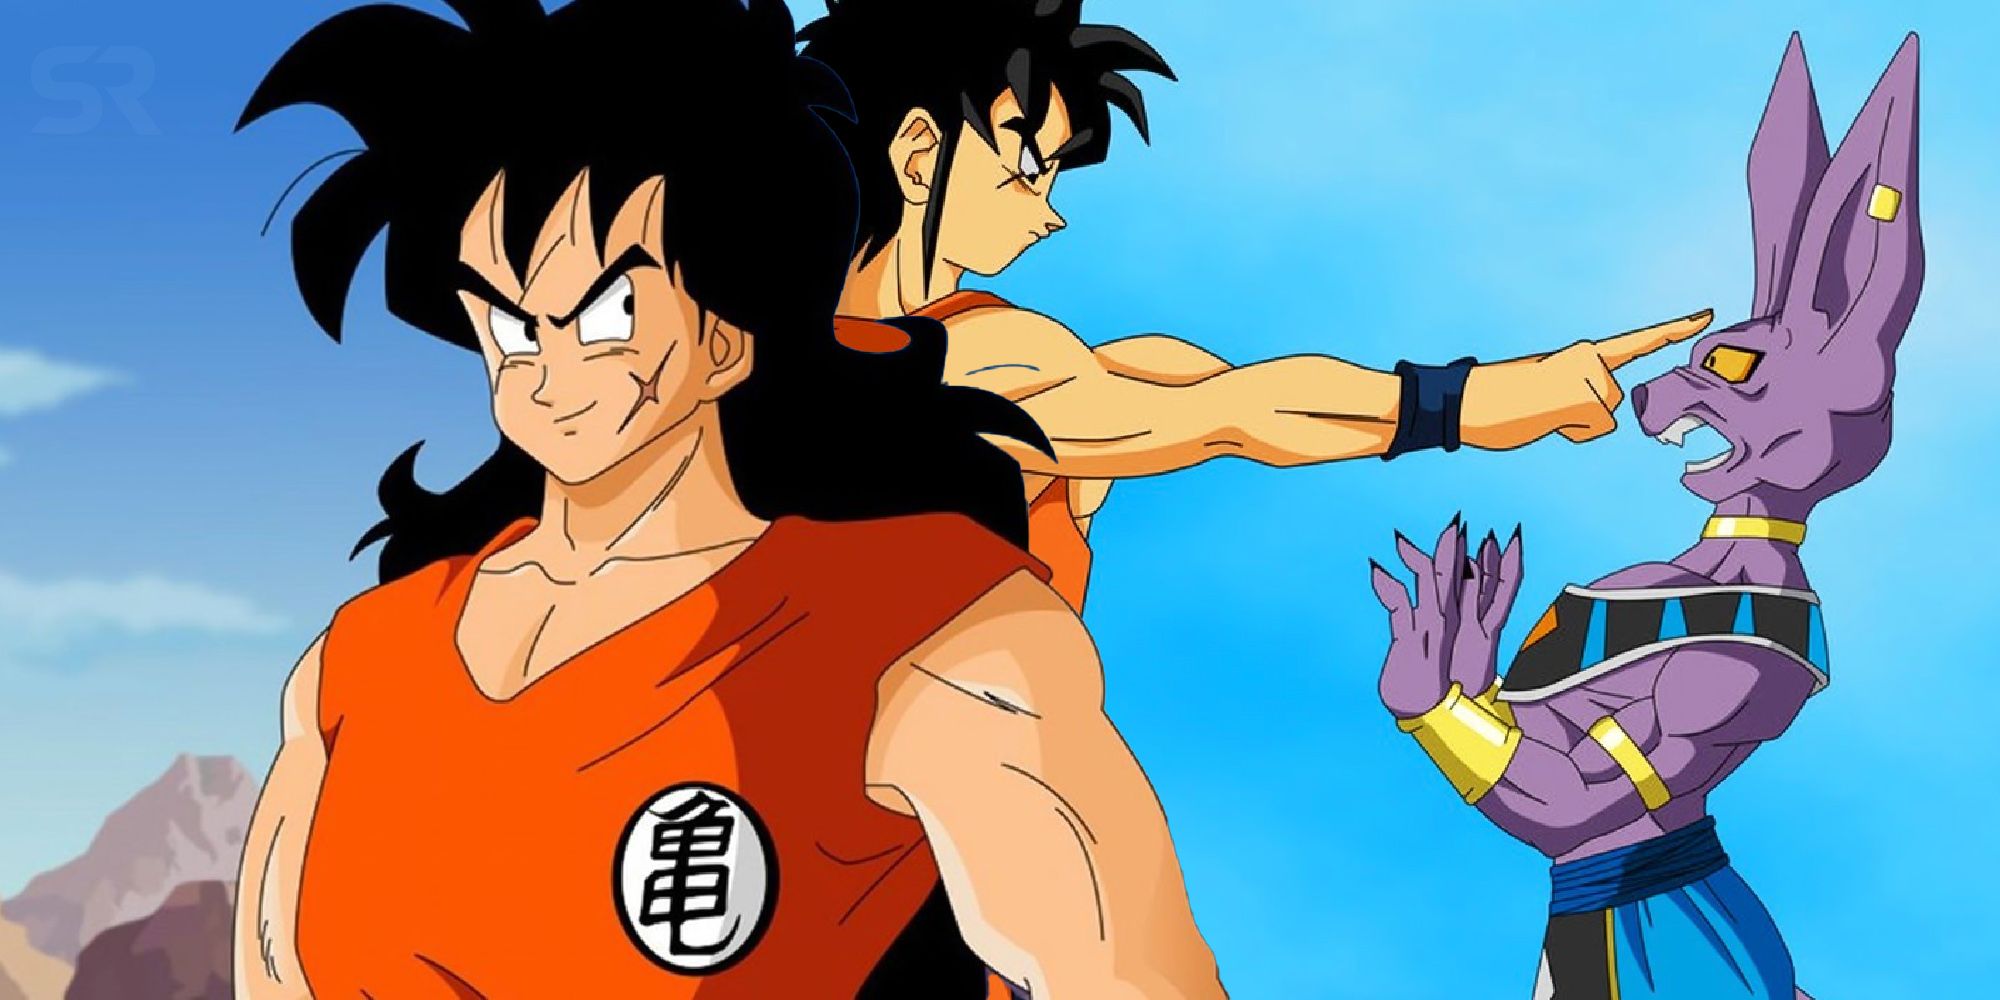 Yamcha is Officially Dragon Ball's Most Delusional Hero